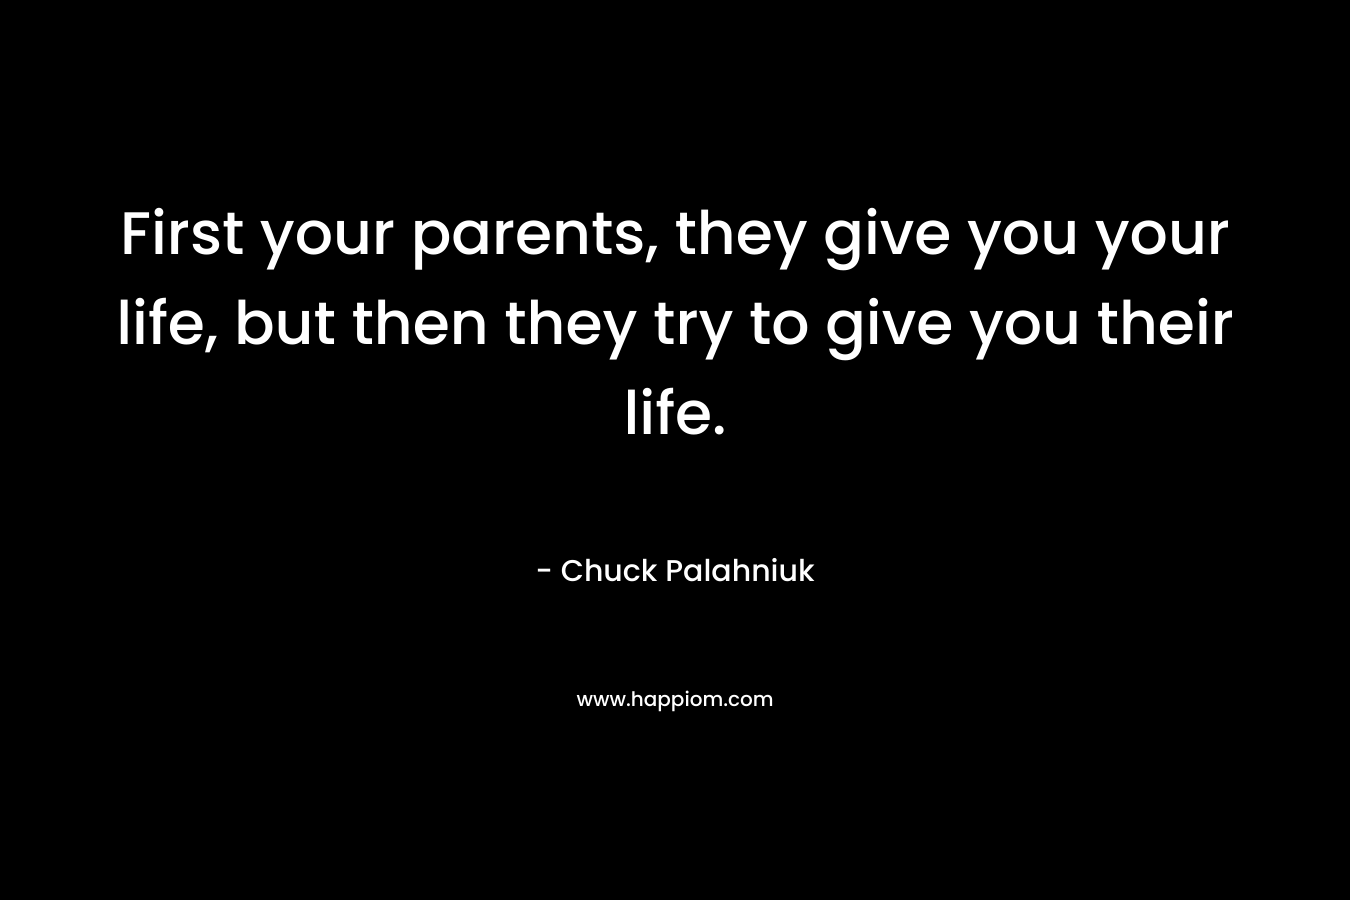 First your parents, they give you your life, but then they try to give you their life. – Chuck Palahniuk